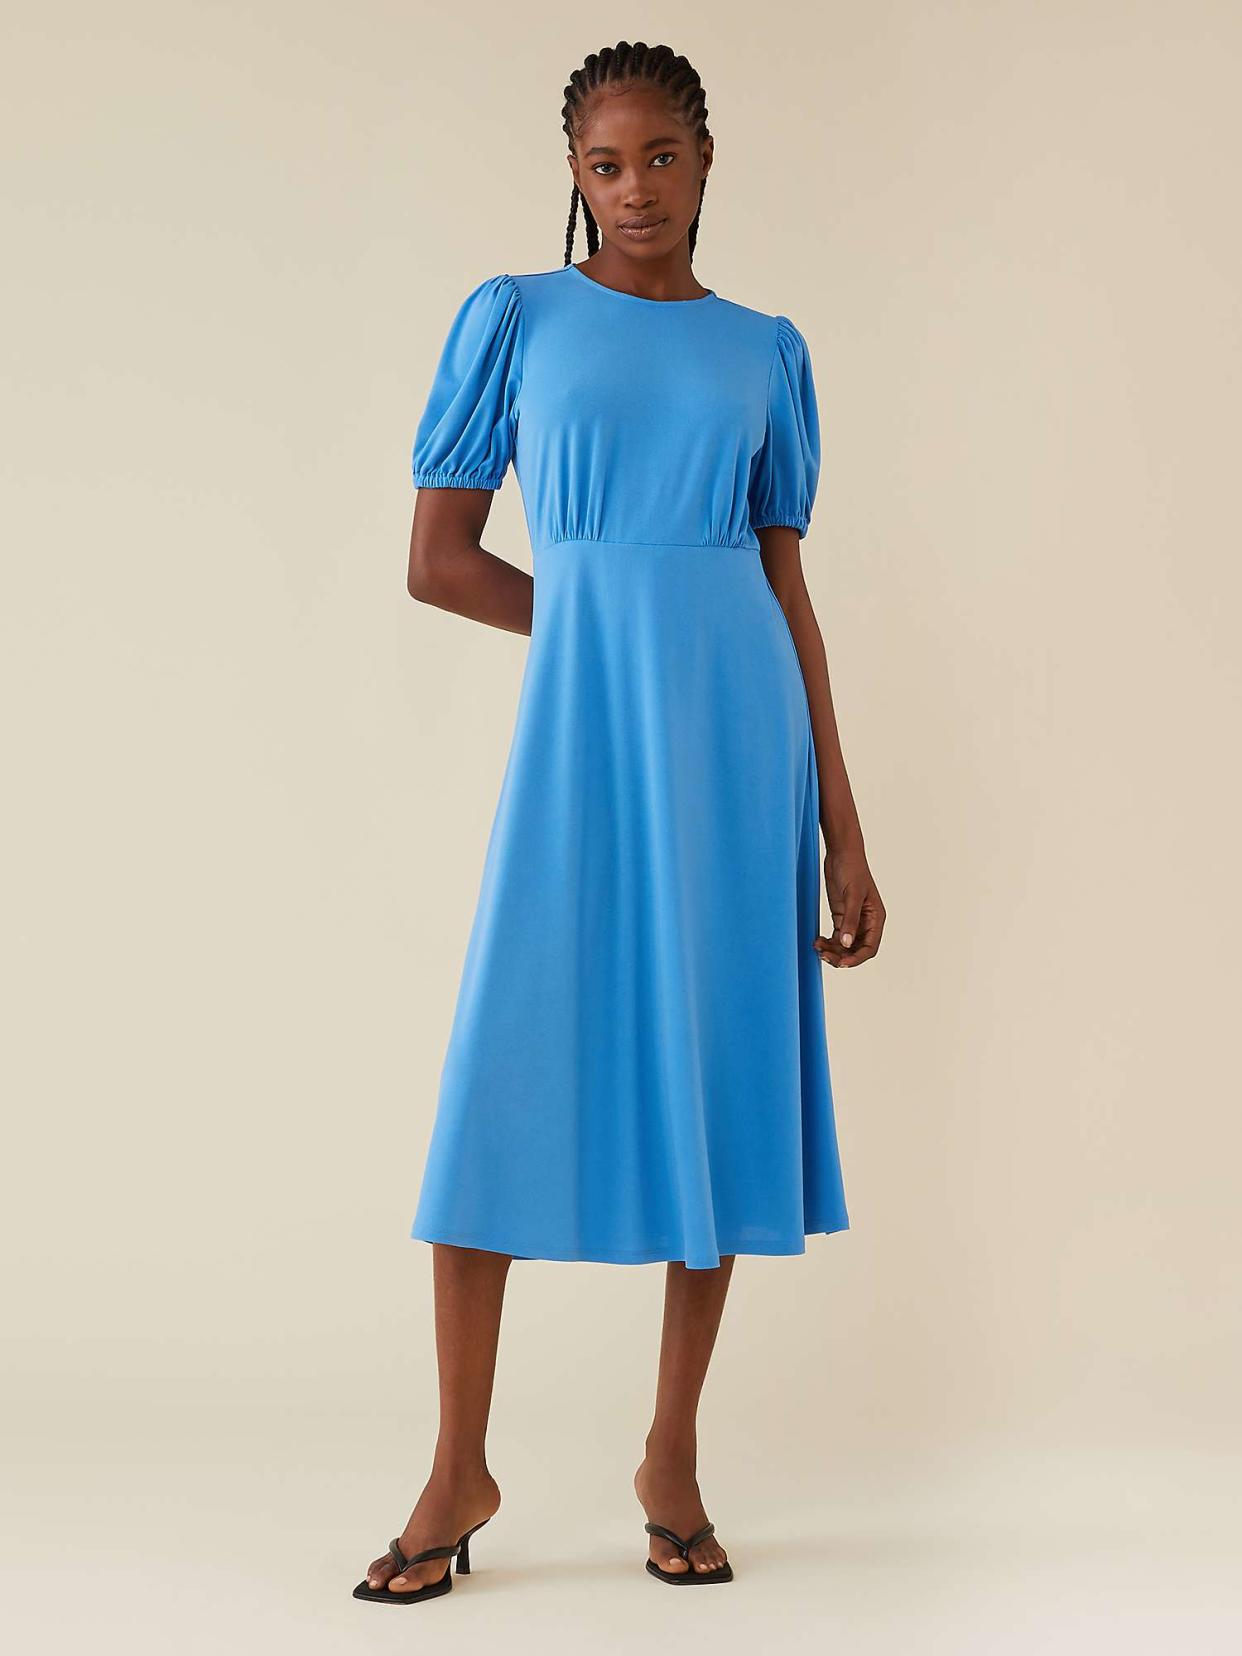 The flattering midi dress is also available in a forget-me-not blue. (John Lewis)